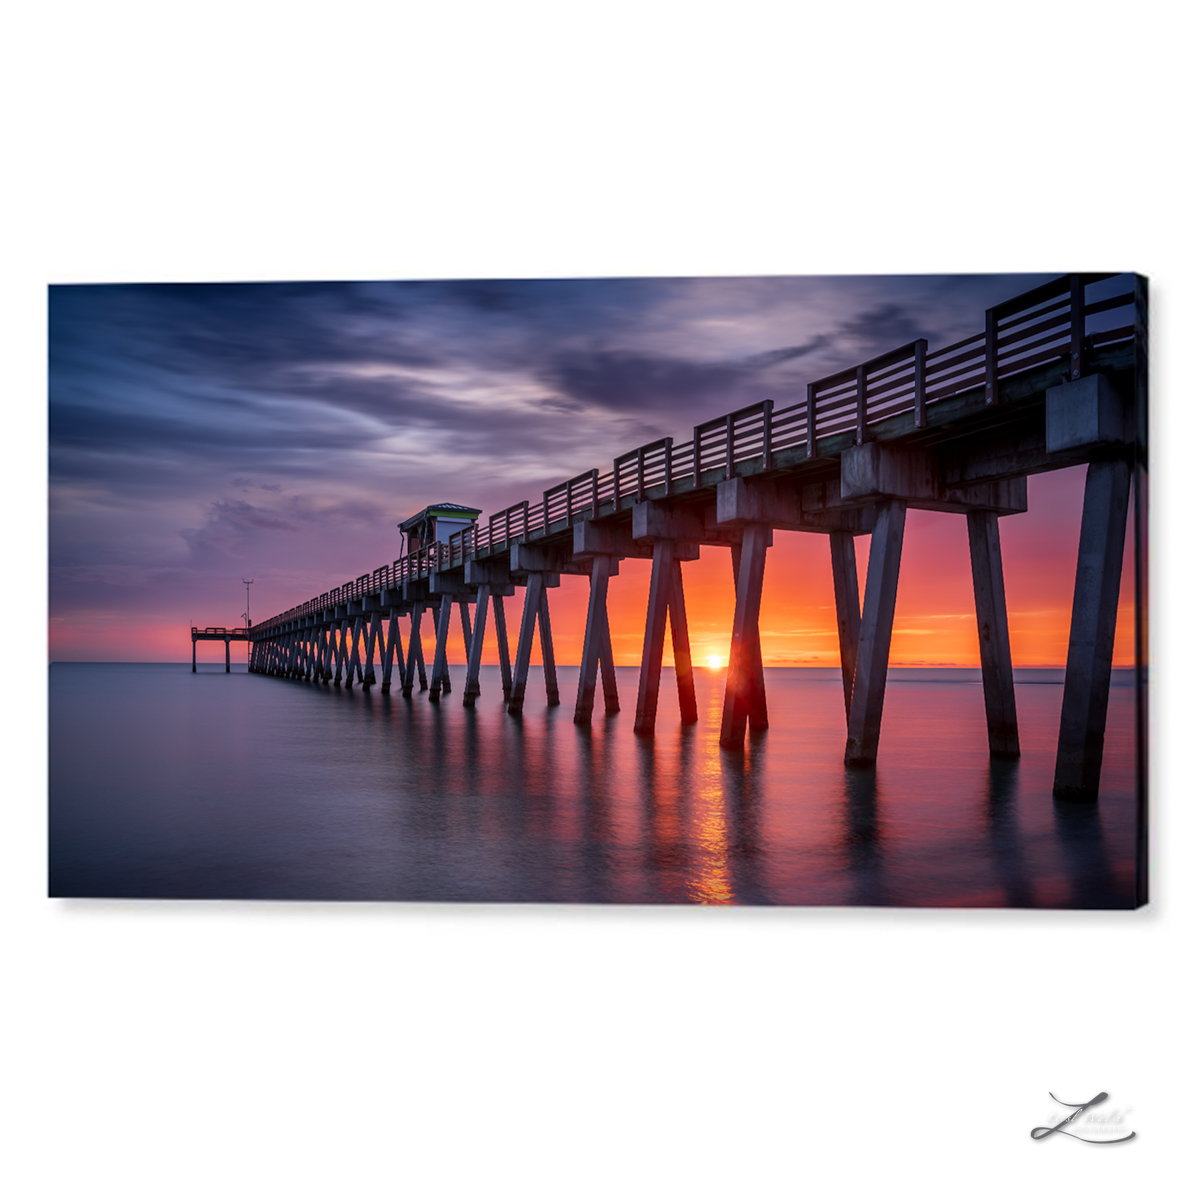 Thank you to the buyer from Venice, Florida who purchased a 40 x 22.5 #canvasprint of the #venicefishingpier at #sunset!
liesl-walsh.pixels.com/featured/venic…
#veniceflorida #venicefl #coastaldecor #floridawallart #gulfcoast #beachhousedecor #florida